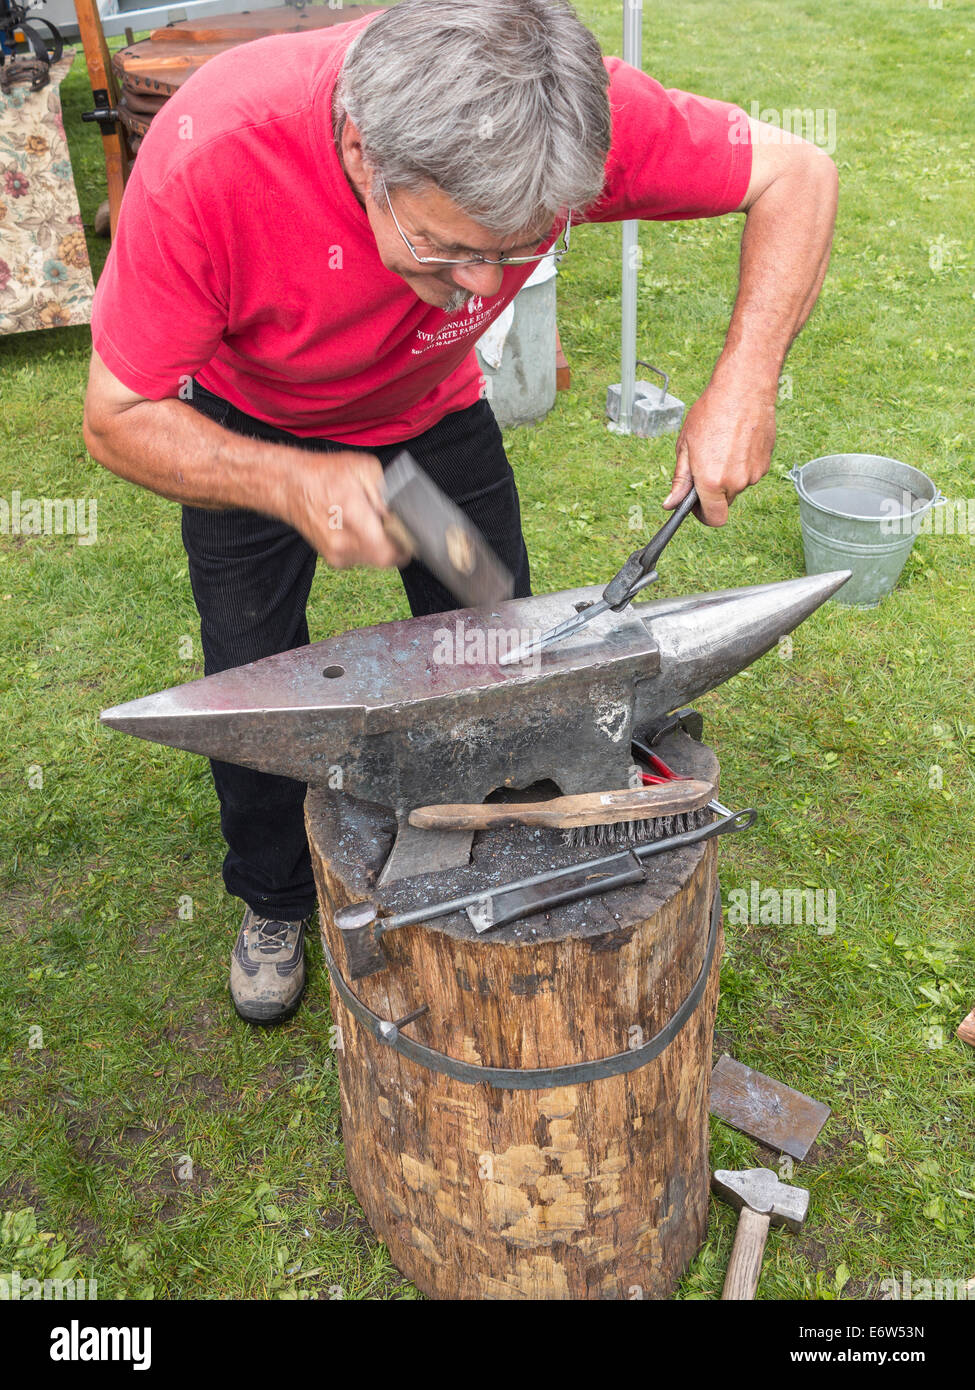 A blacksmith hammering a piece of hot iron into shape on an anvil Stock Photo